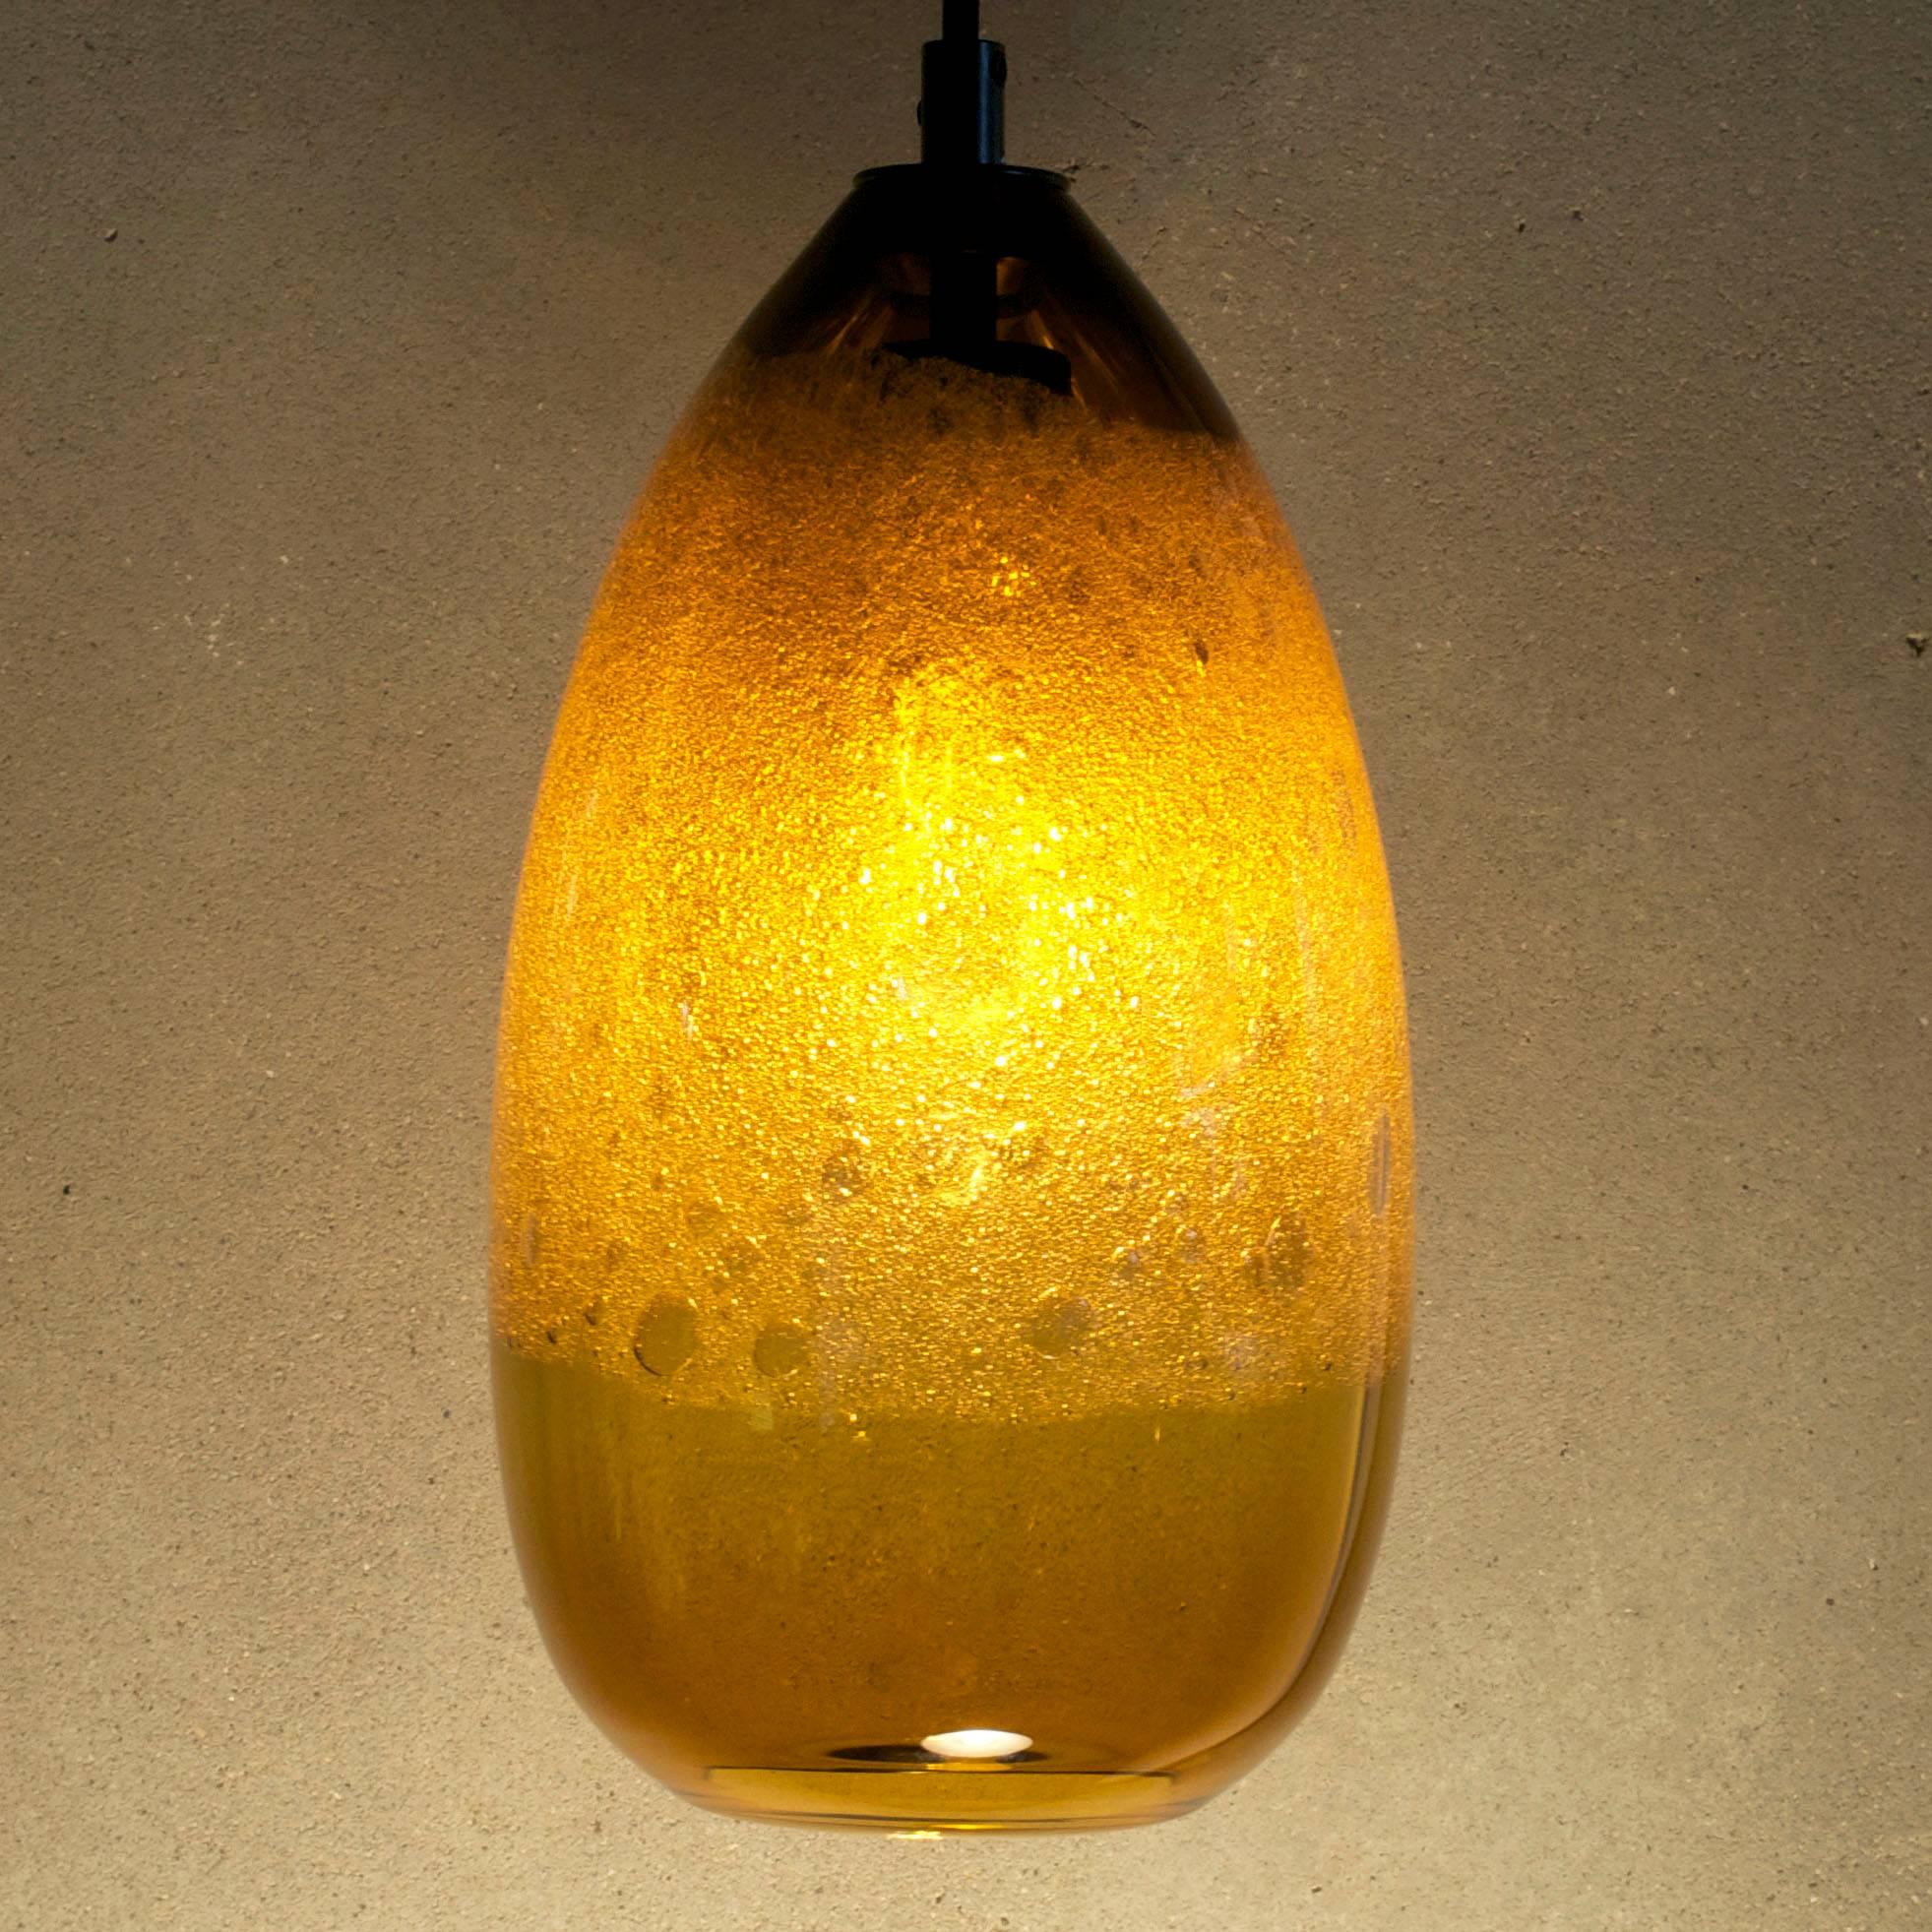 Blown glass shade - amber cone bubble pendant • hand blown glass • Canopy/cord options Available
Various colors available
Measures: 12